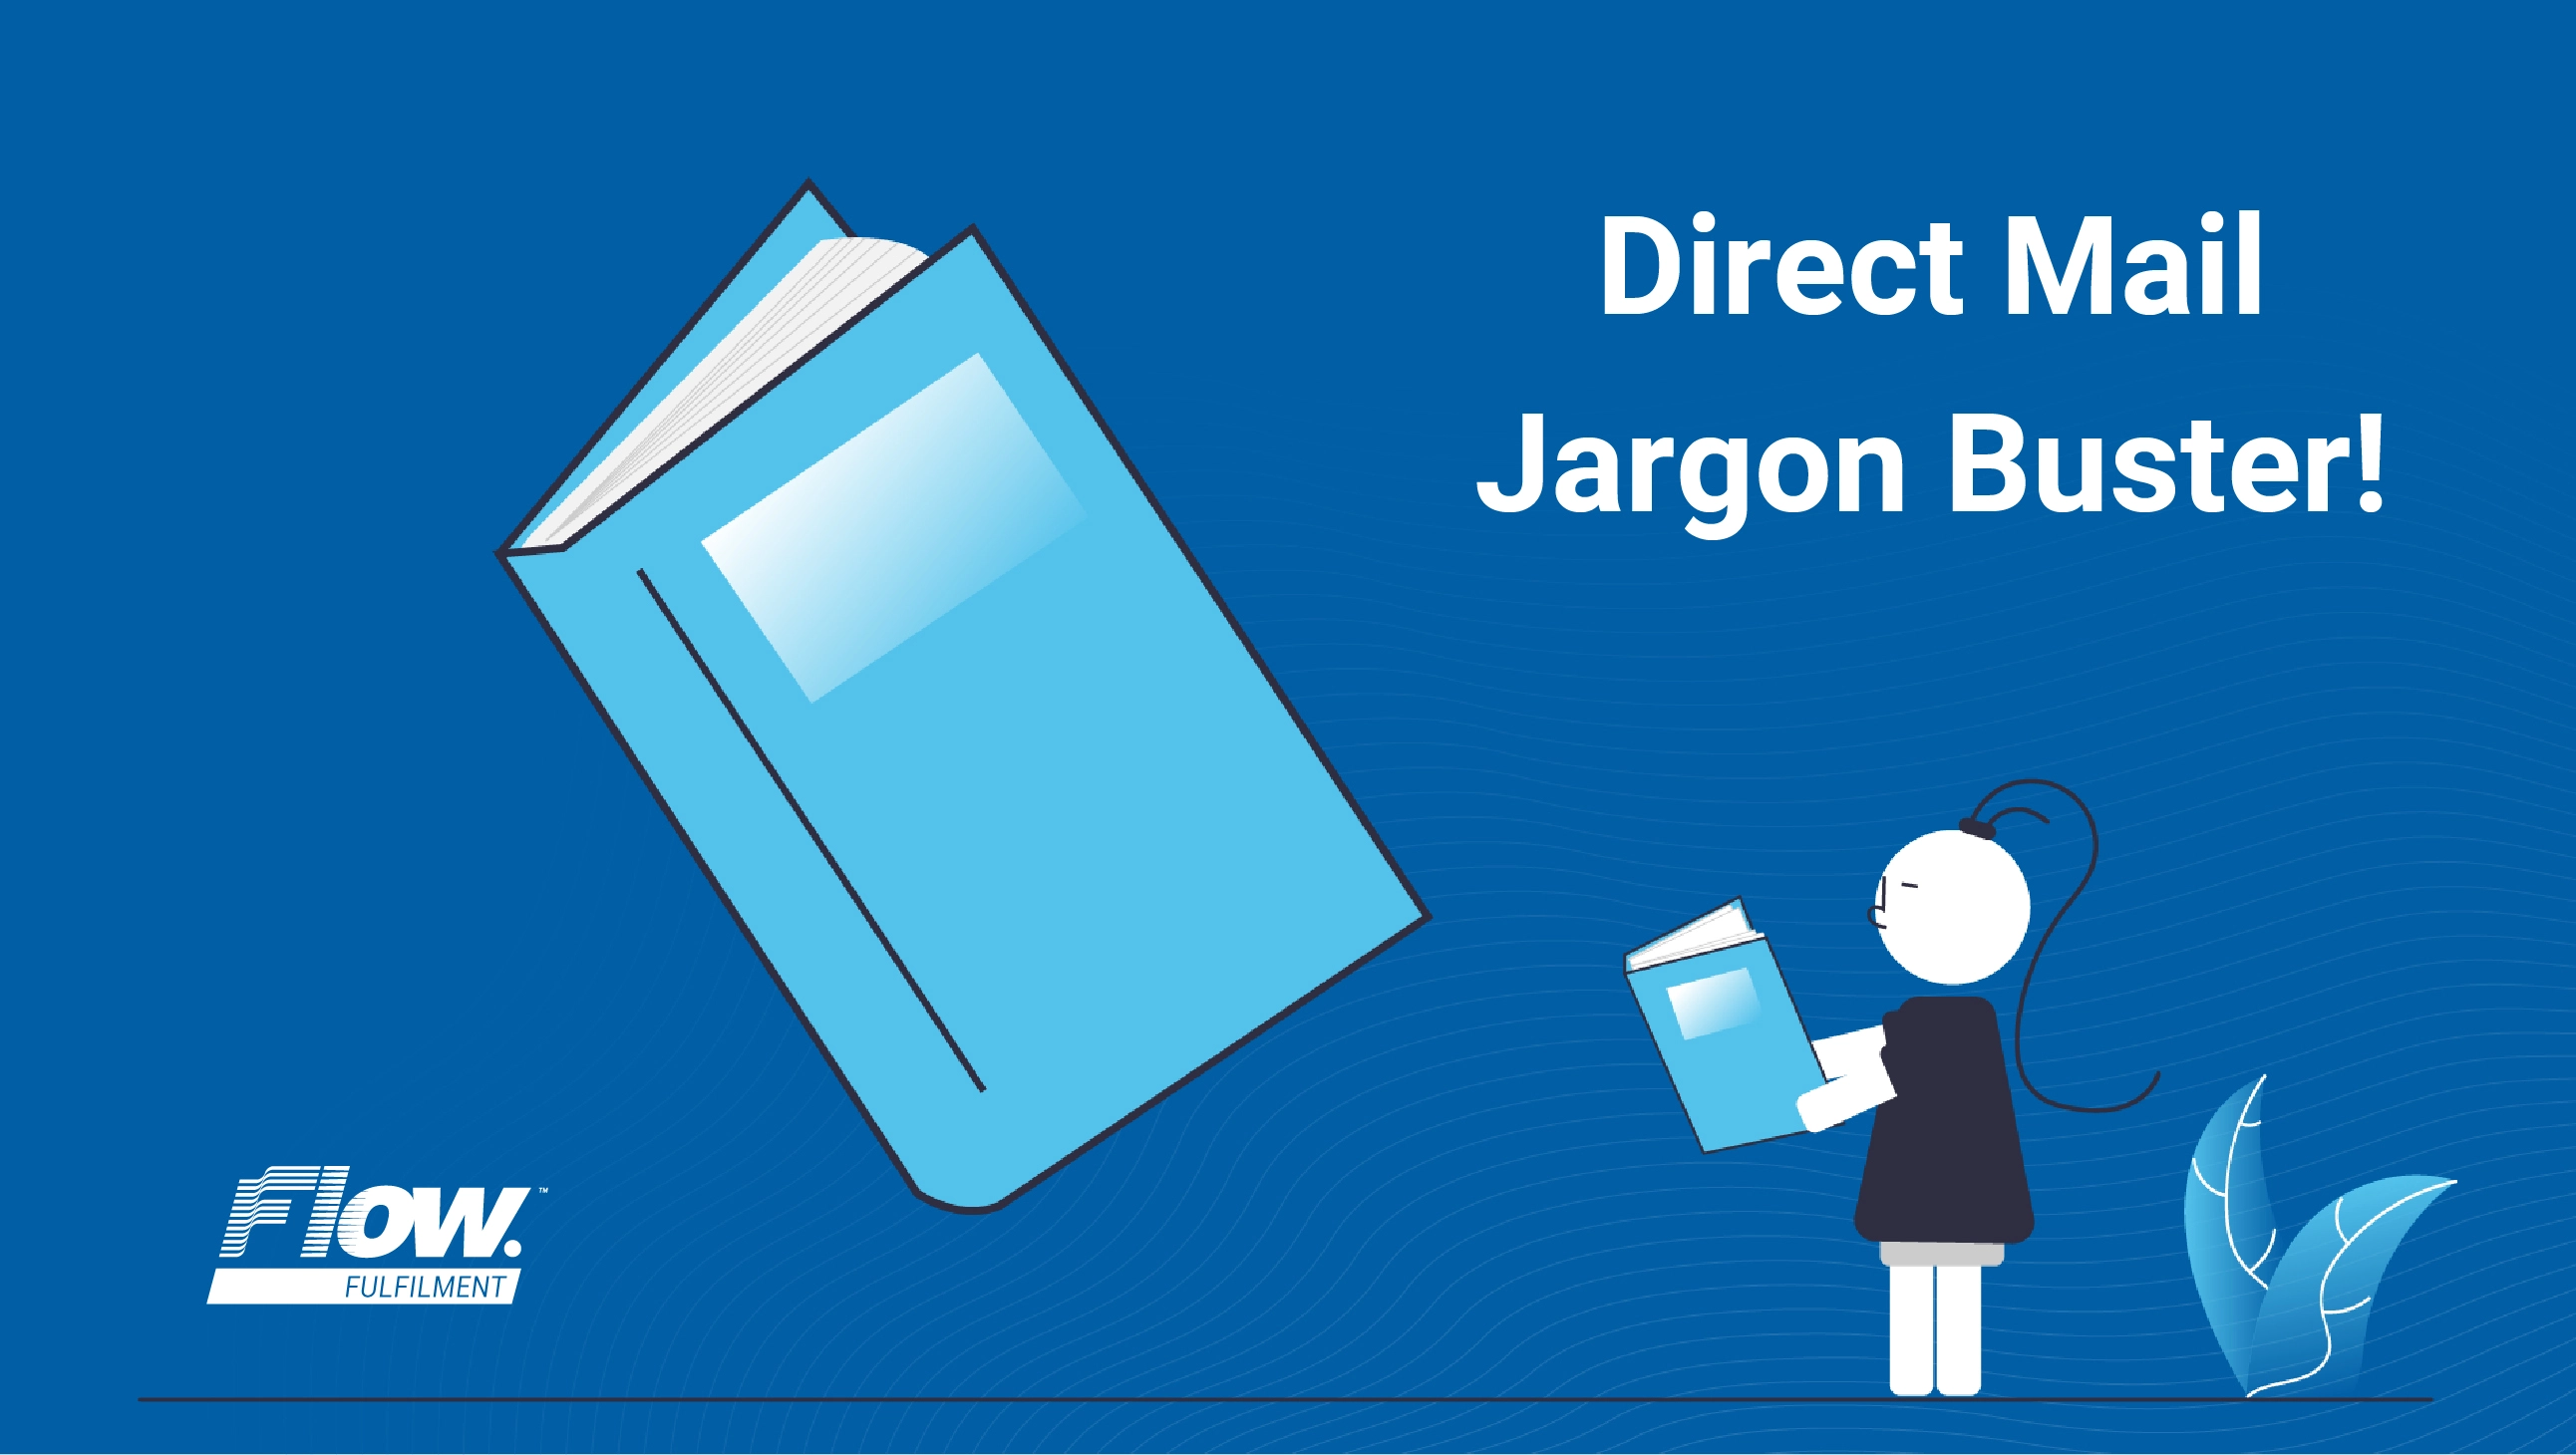 direct-mail-jargon-buster-01.jpg